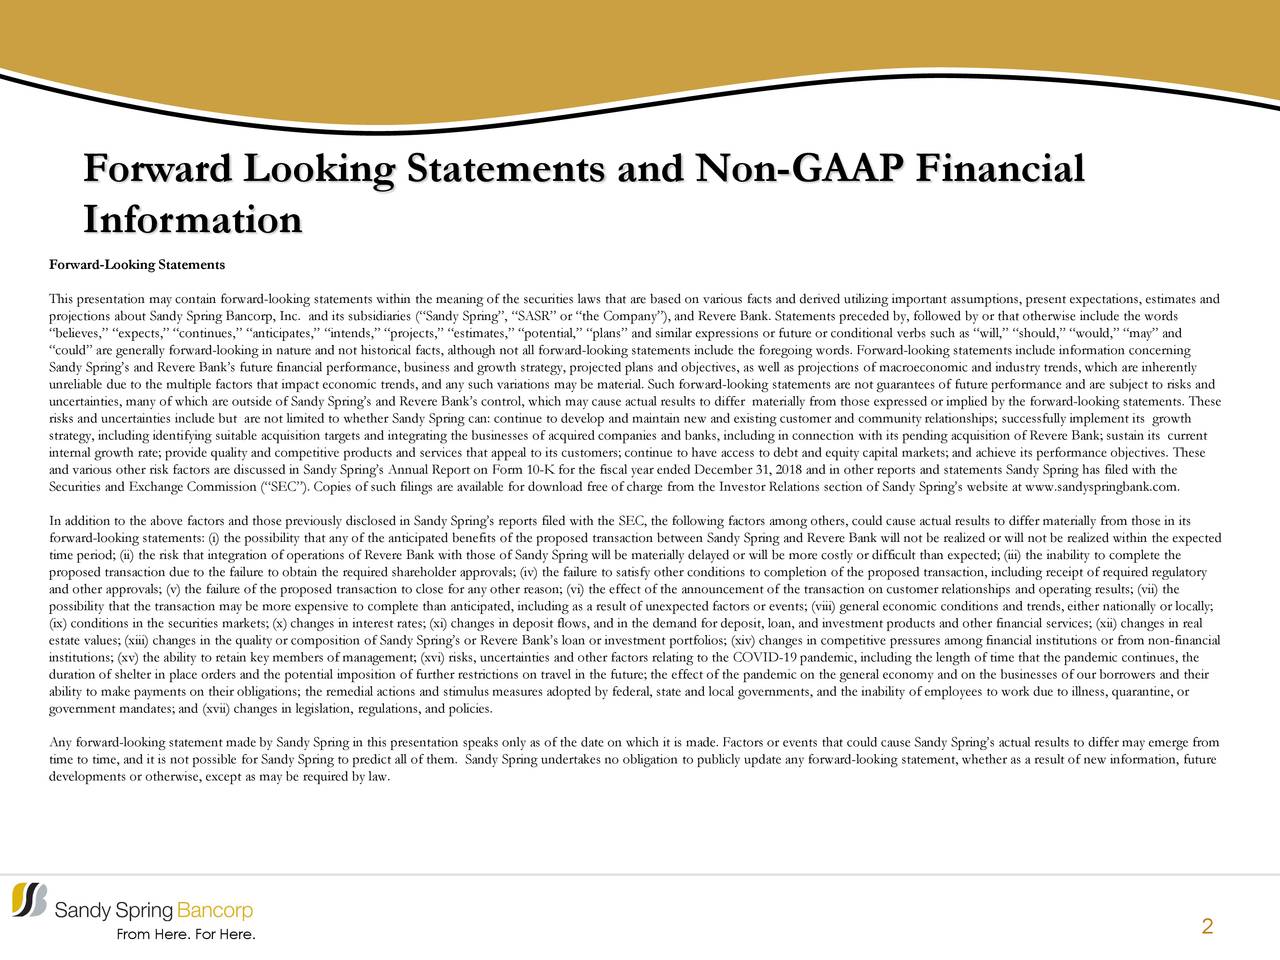 Forward Looking Statements and Non-GAAP Financial